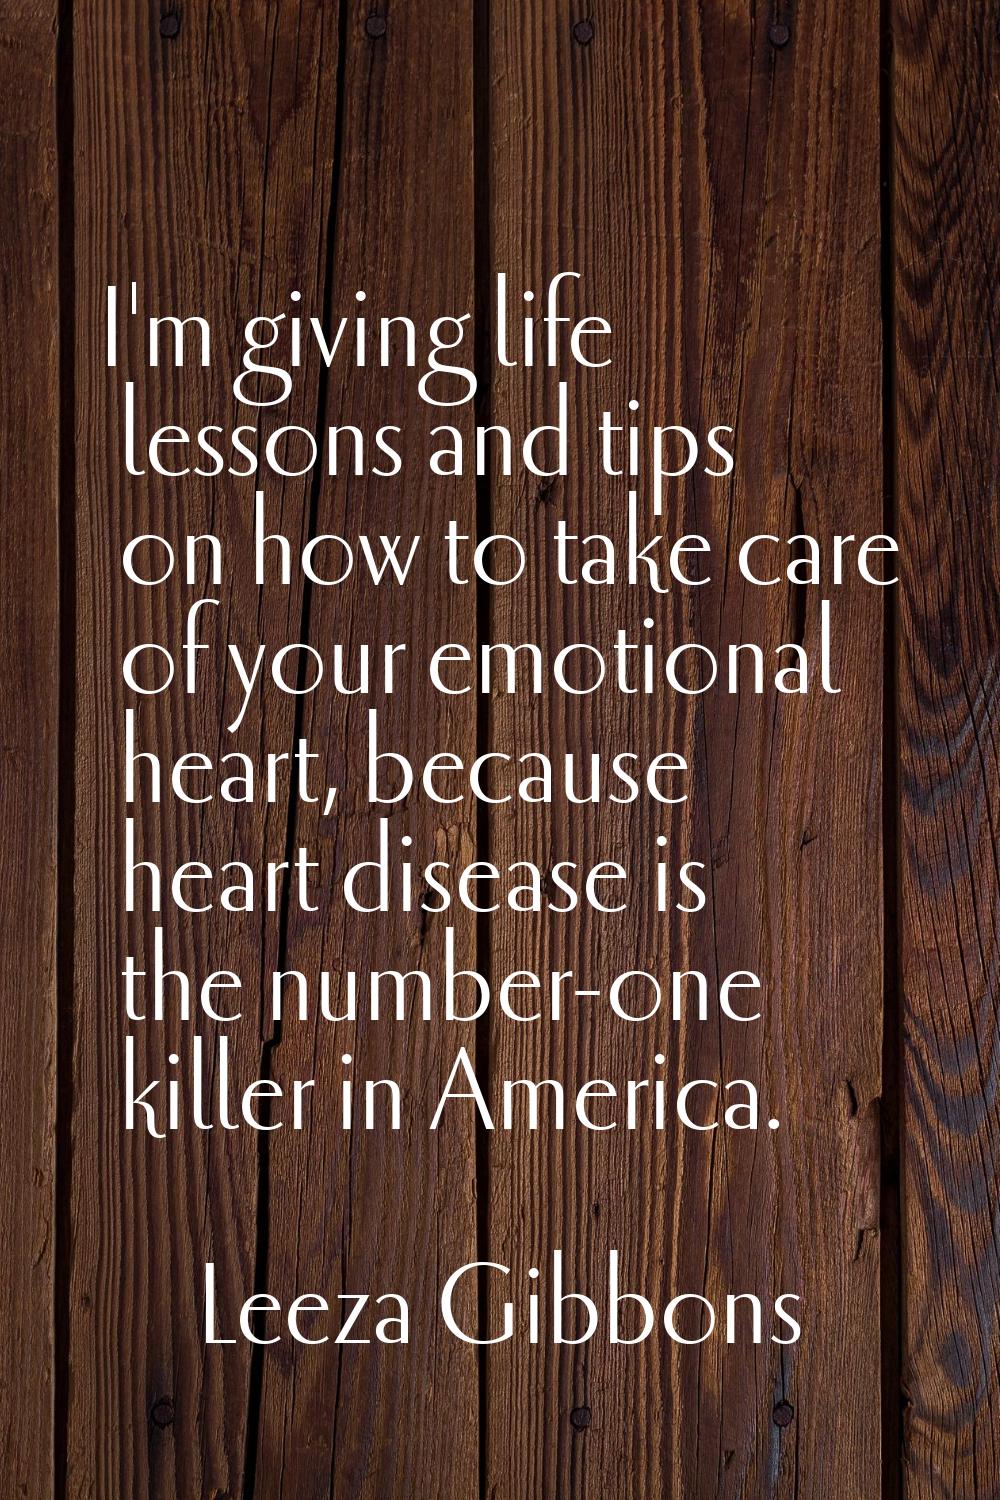 I'm giving life lessons and tips on how to take care of your emotional heart, because heart disease